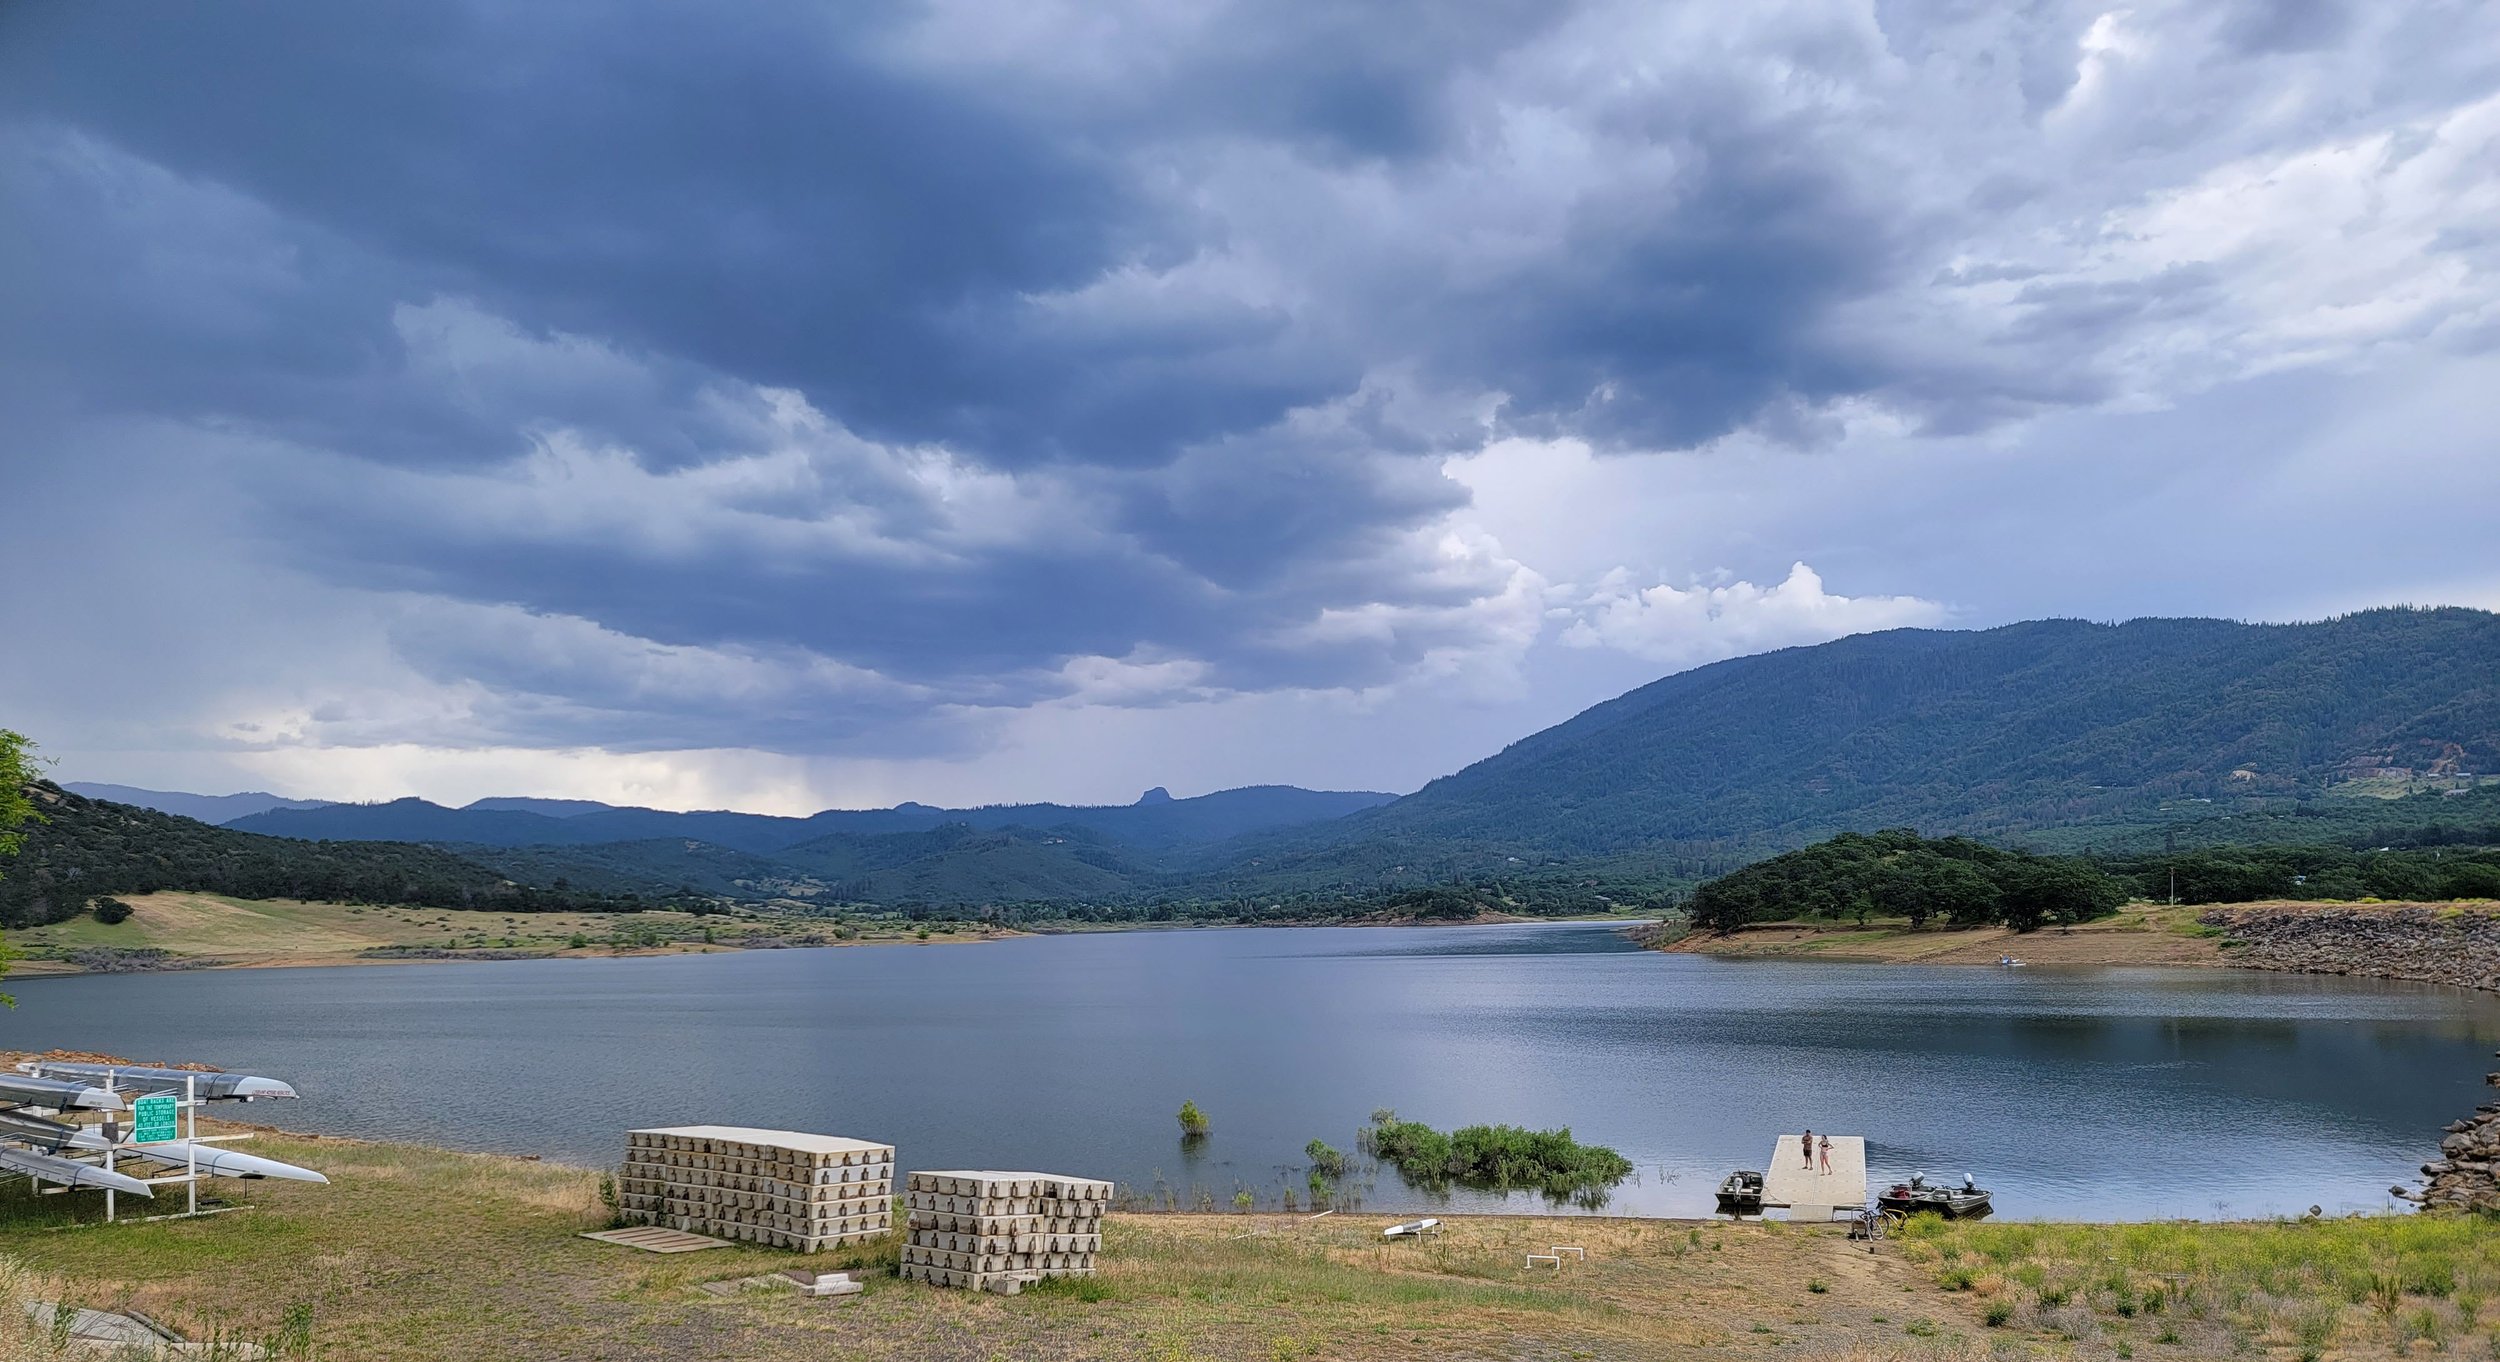  Went up Ashland until I felt rain, which wasn’t very long. Then I tried biking a bit near Emigrant Lake here but I could see lightning strikes across the skies and everyone was already fleeing the area… 